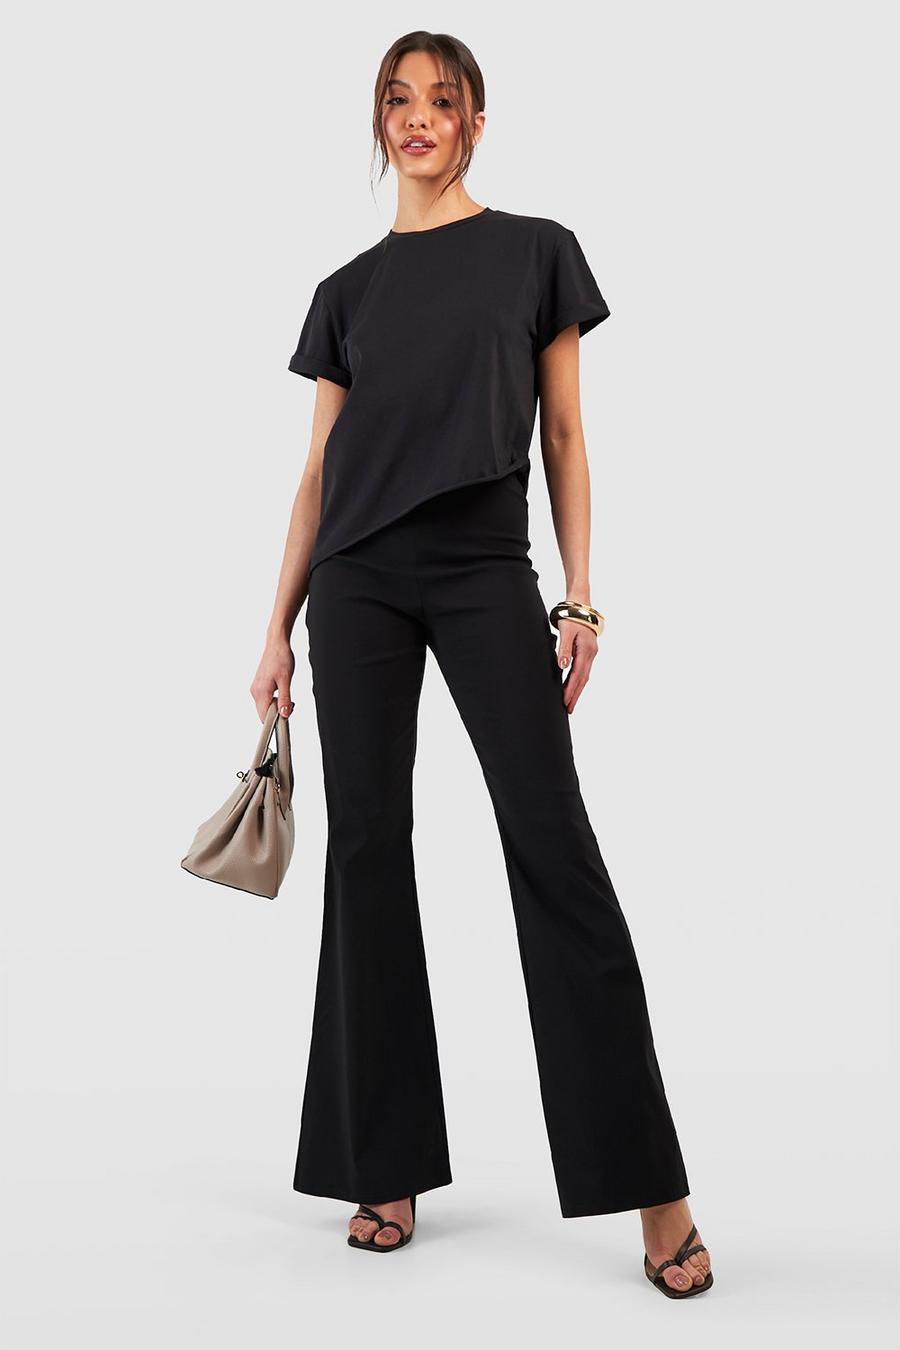 Black Super Stretch Fit & Flare Tailored Pants image number 1